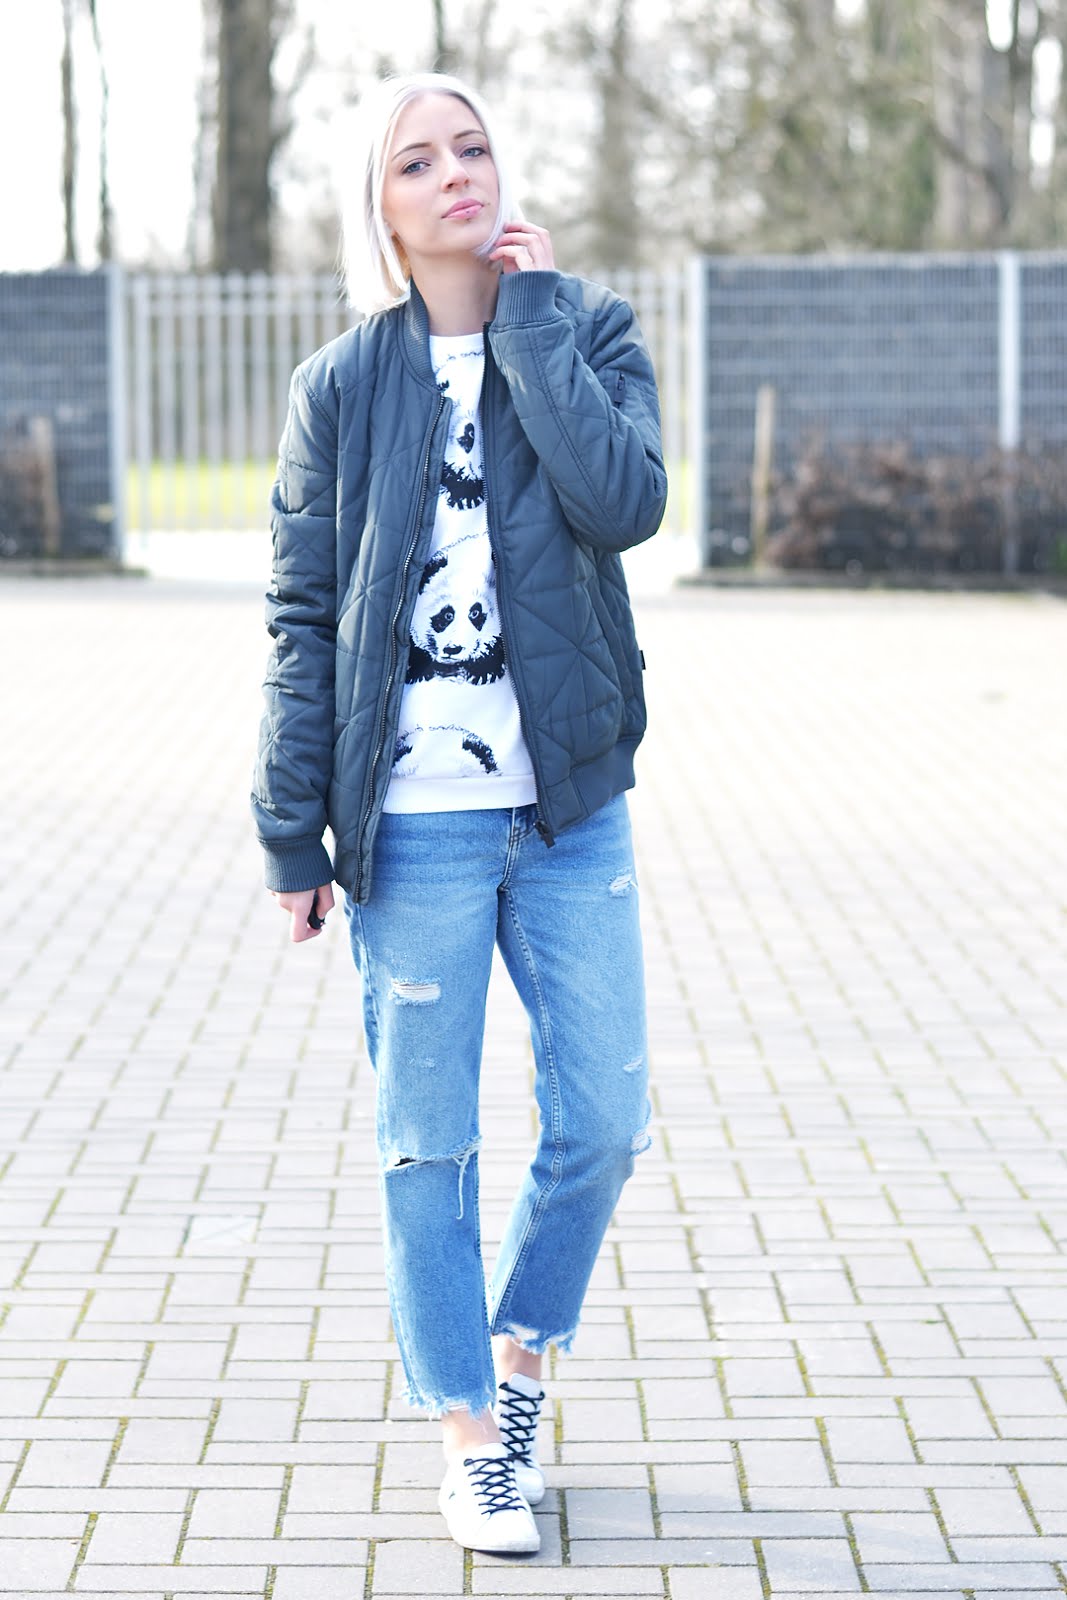 The sting, grey bomber jacket, acne studios inspired, budget, mr gugu & miss go, panda sweater, mango, joe, ripped jeans, converse sneakers, street style, belgian fashion blogger, belgische mode blogger, trends